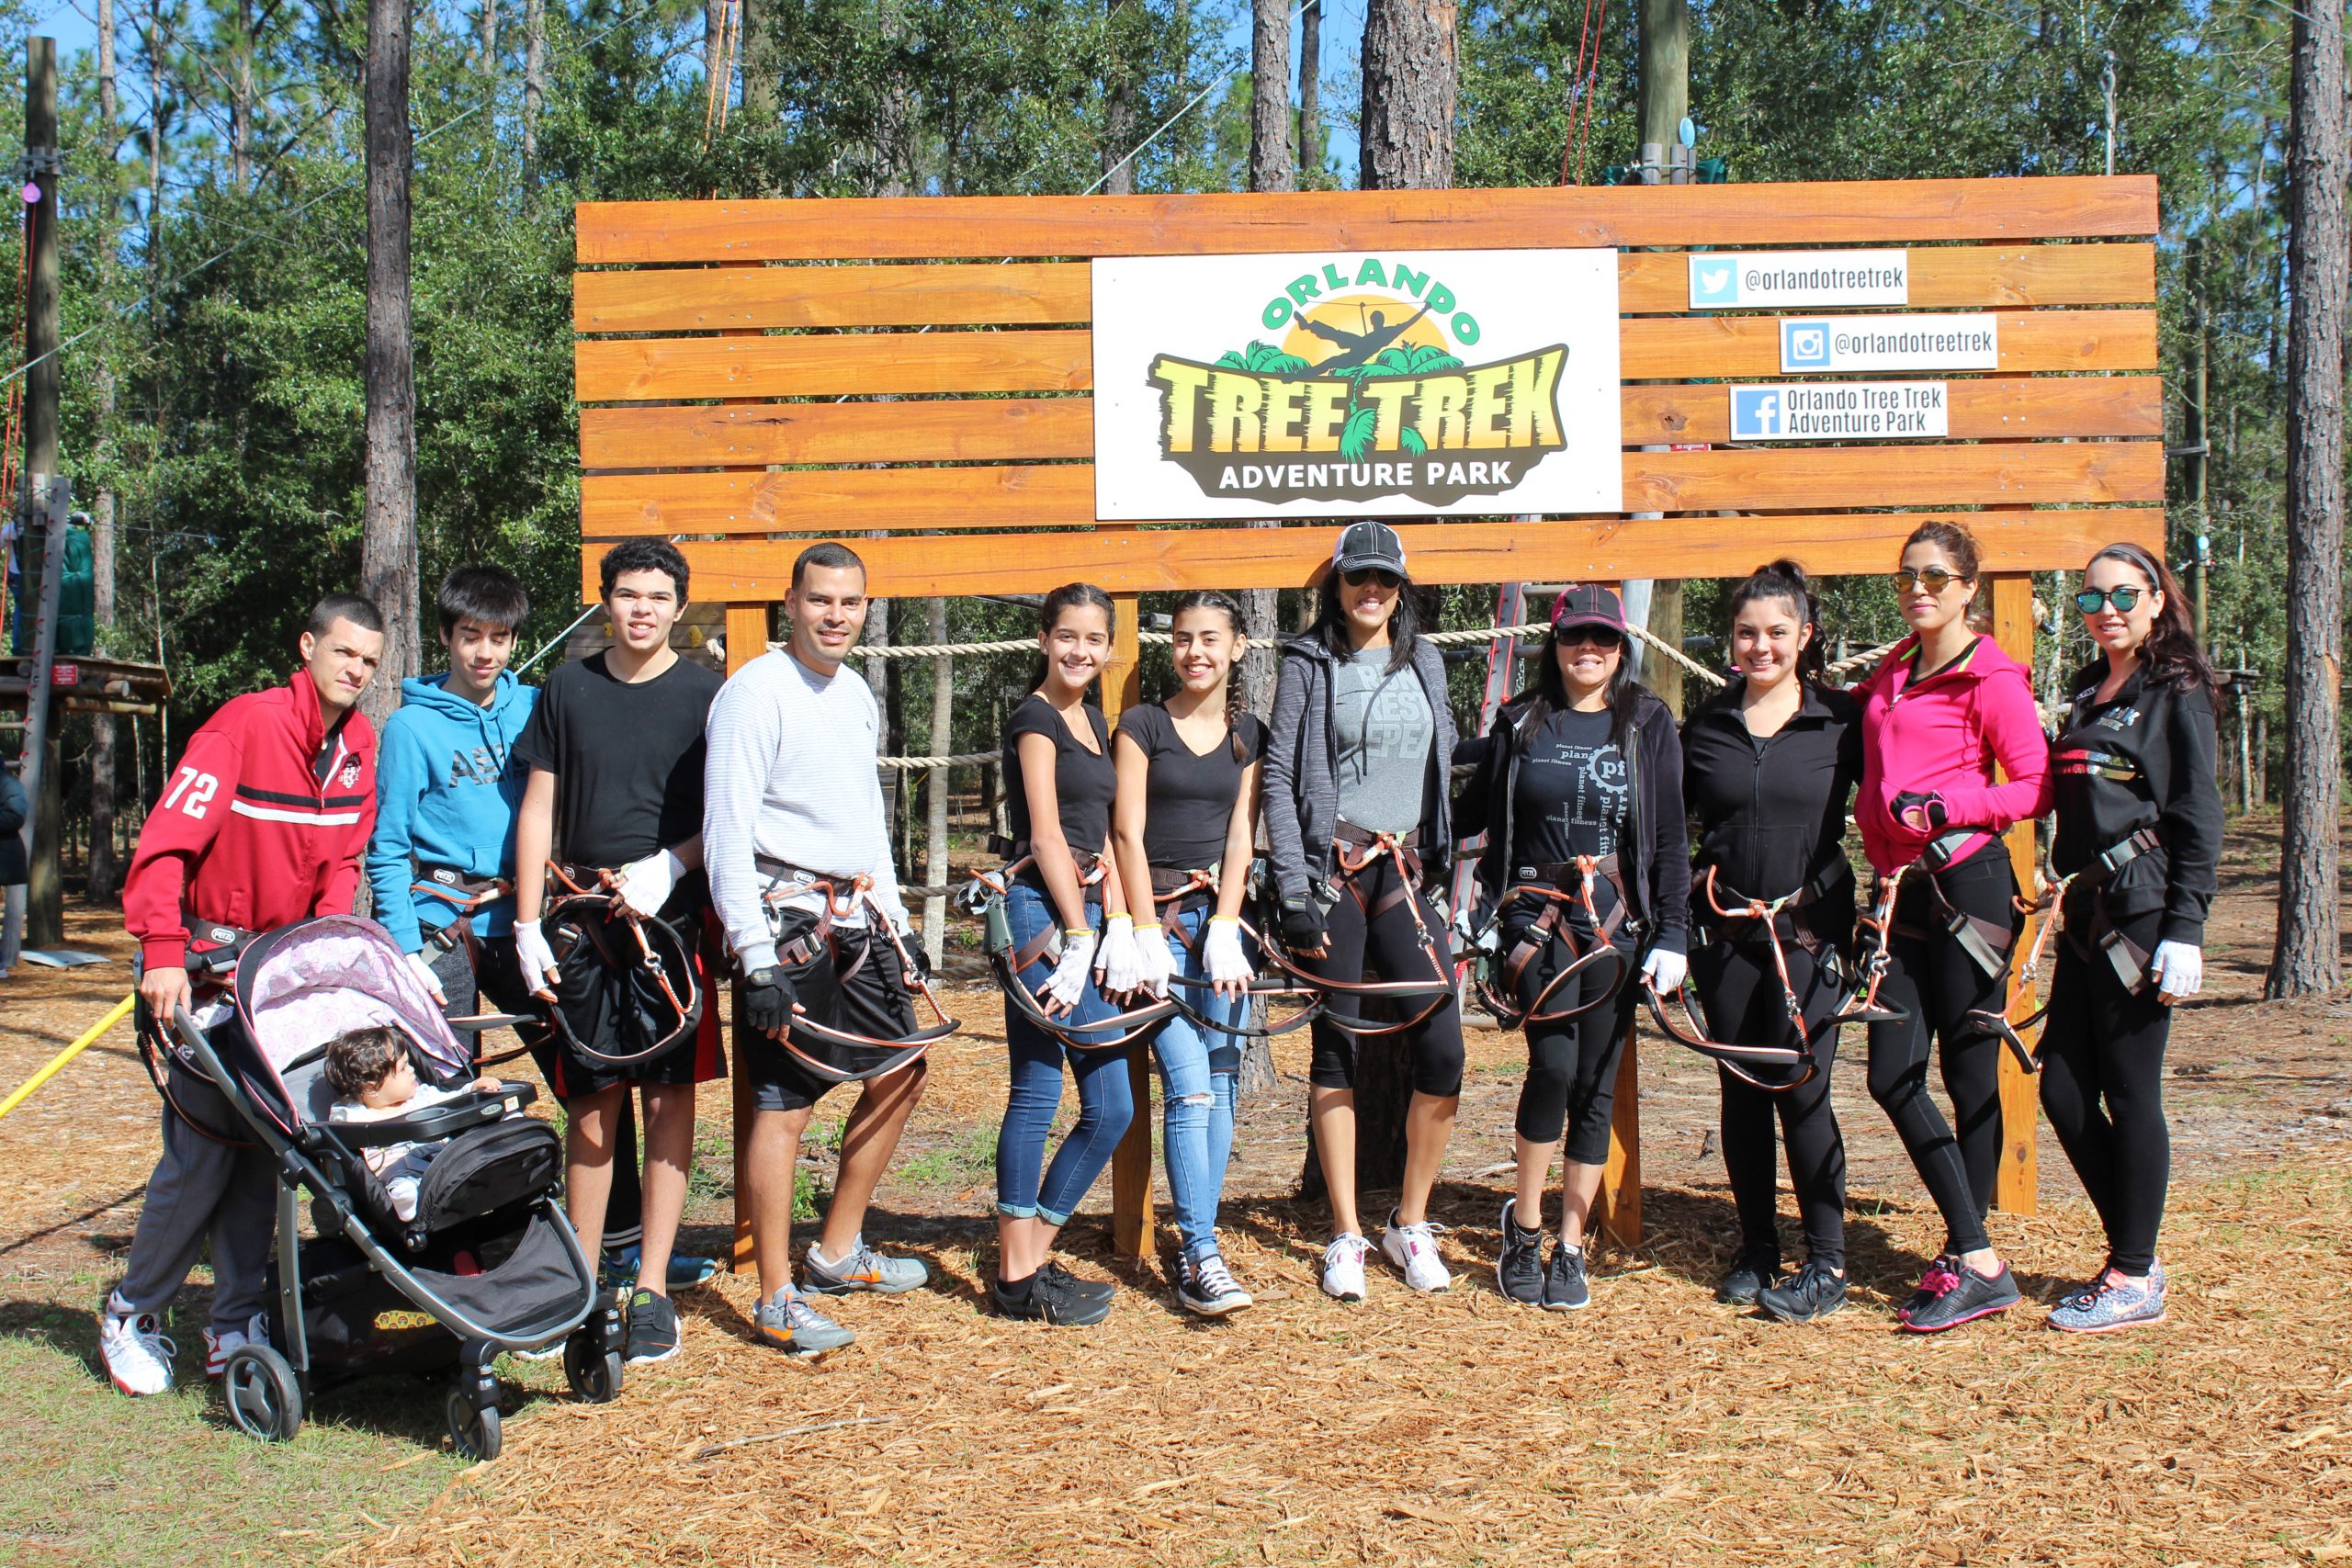 A family is gathered around a sign at Orlando Tree Trek.